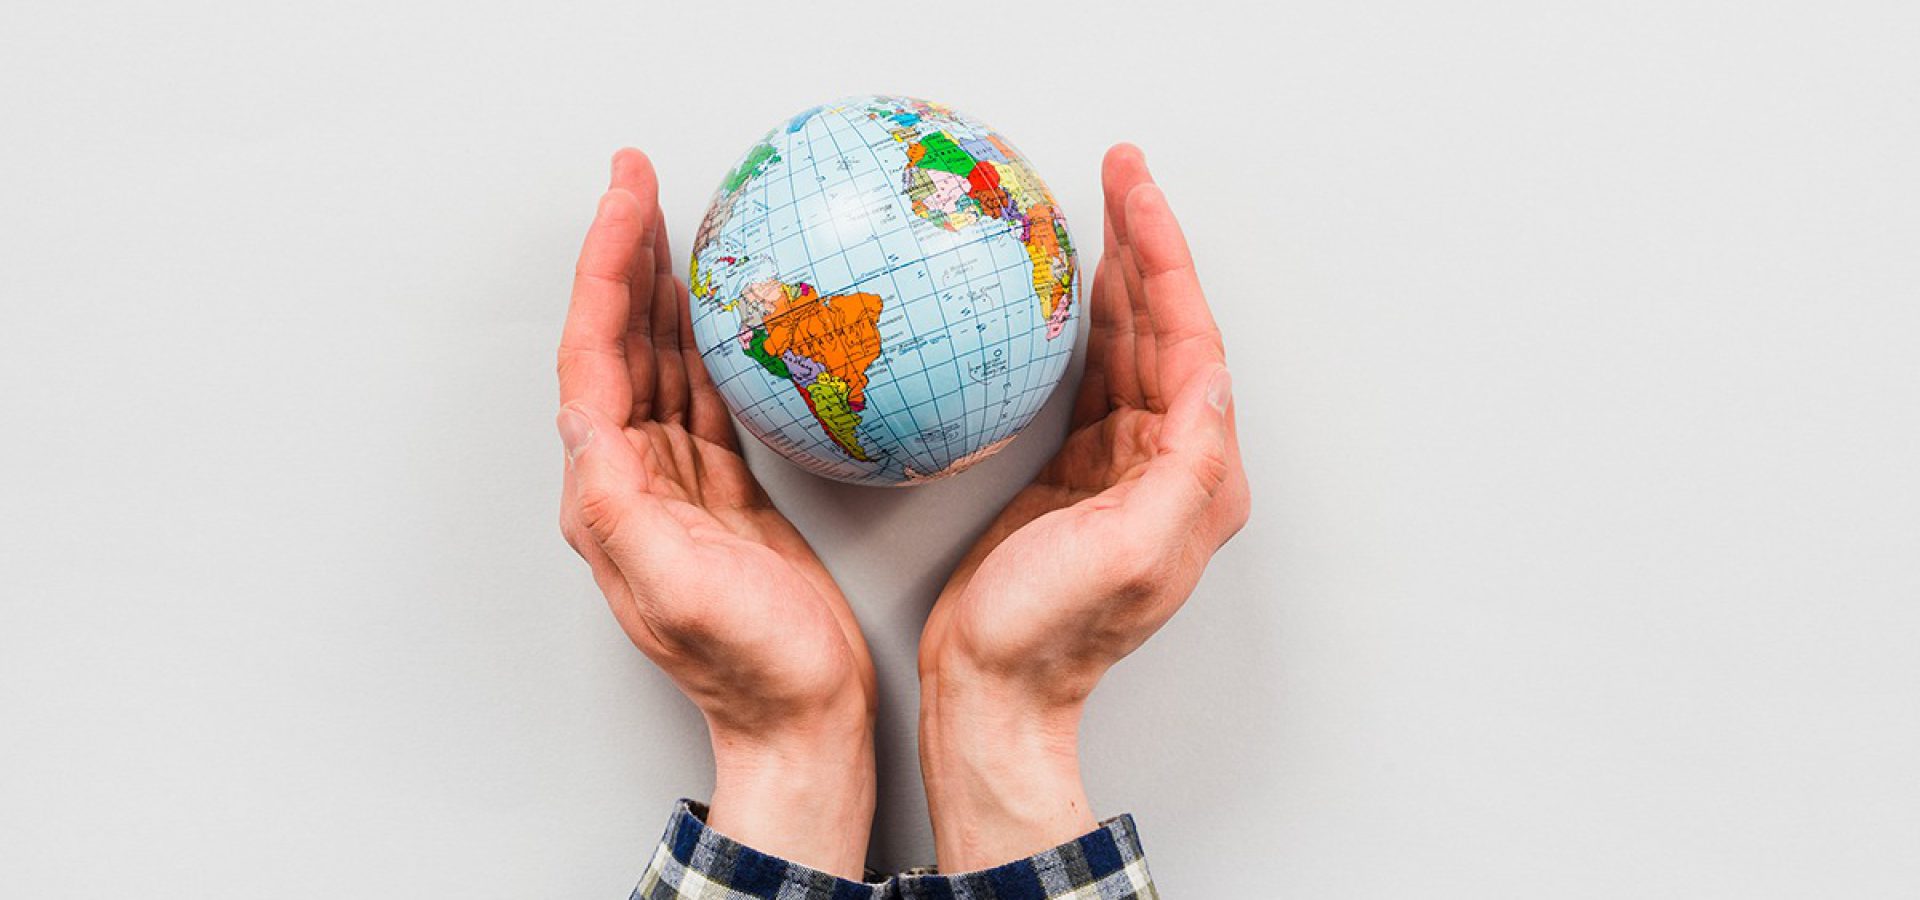 earth-globe-surrounded-by-hands